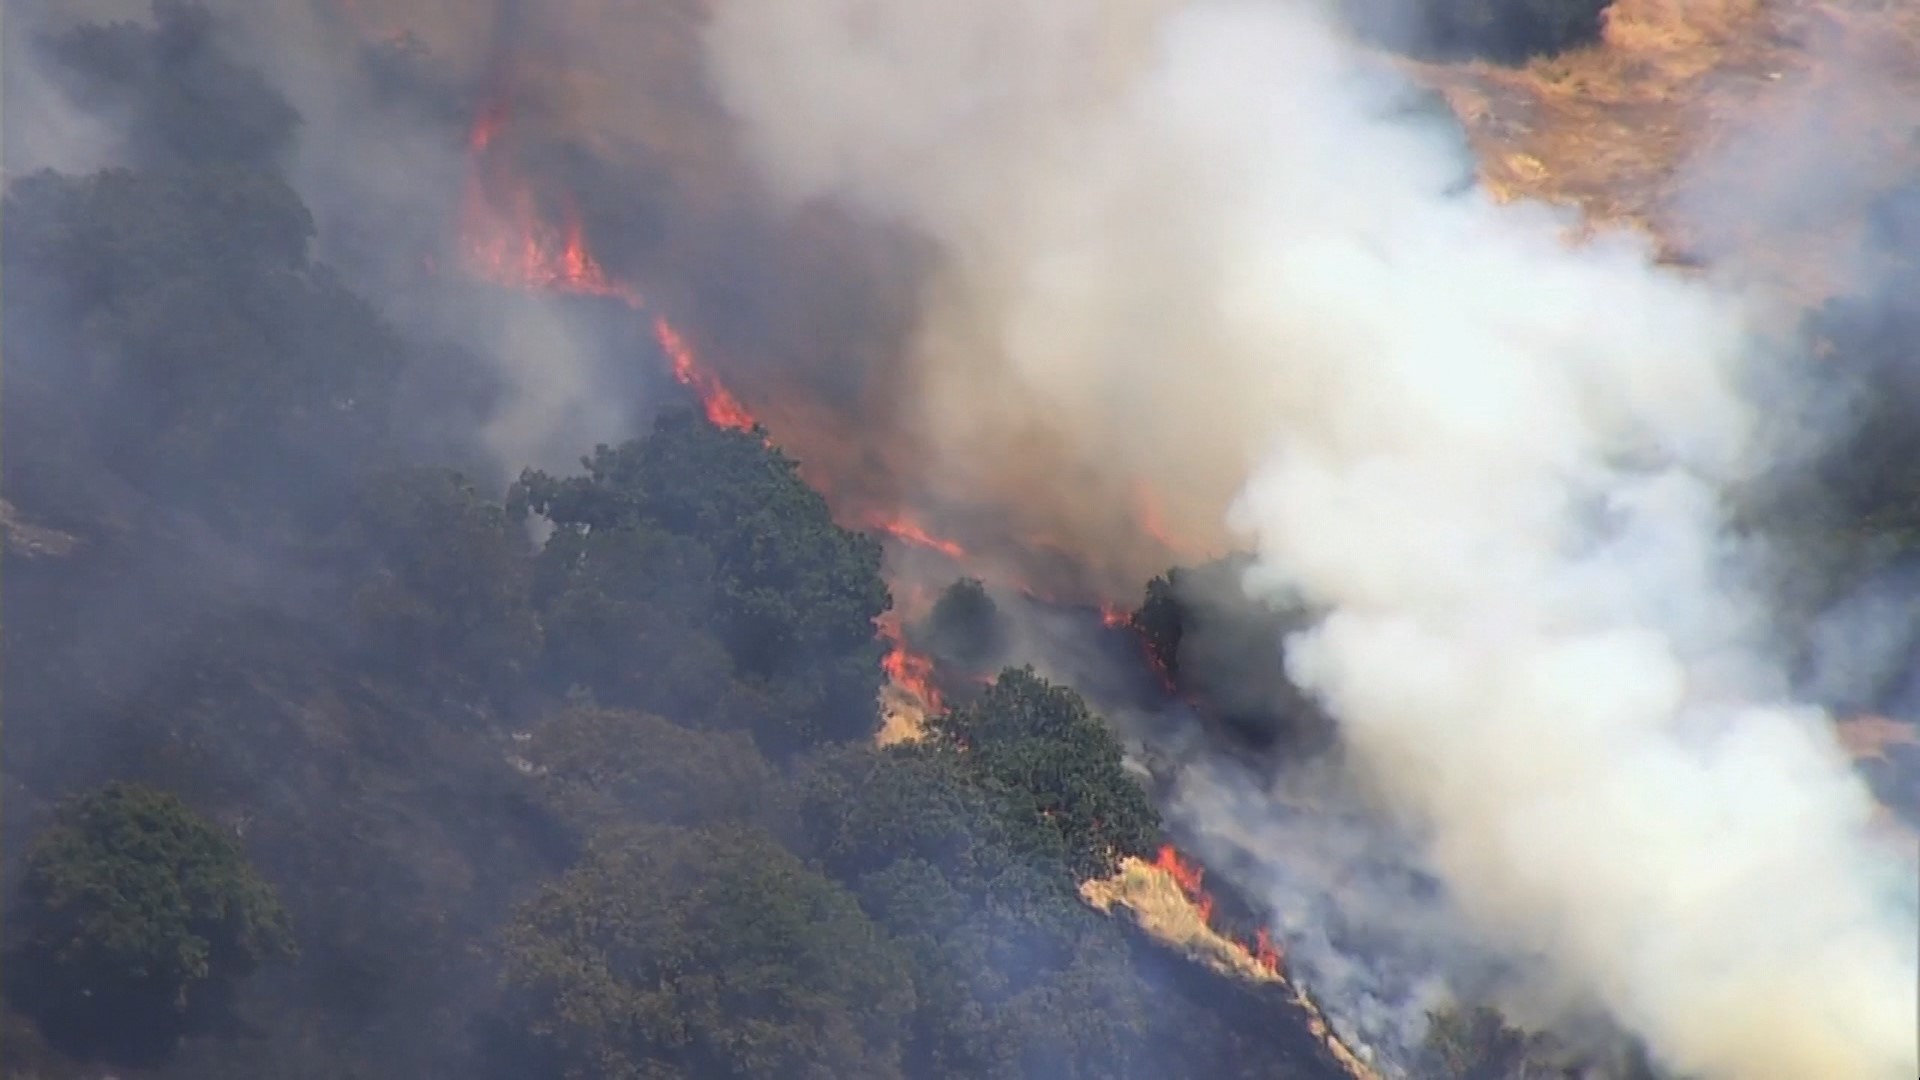 Fairfield fire update: Evacuations were lifted Friday afternoon as fire crews got a handle on a 24 acre grass fire.